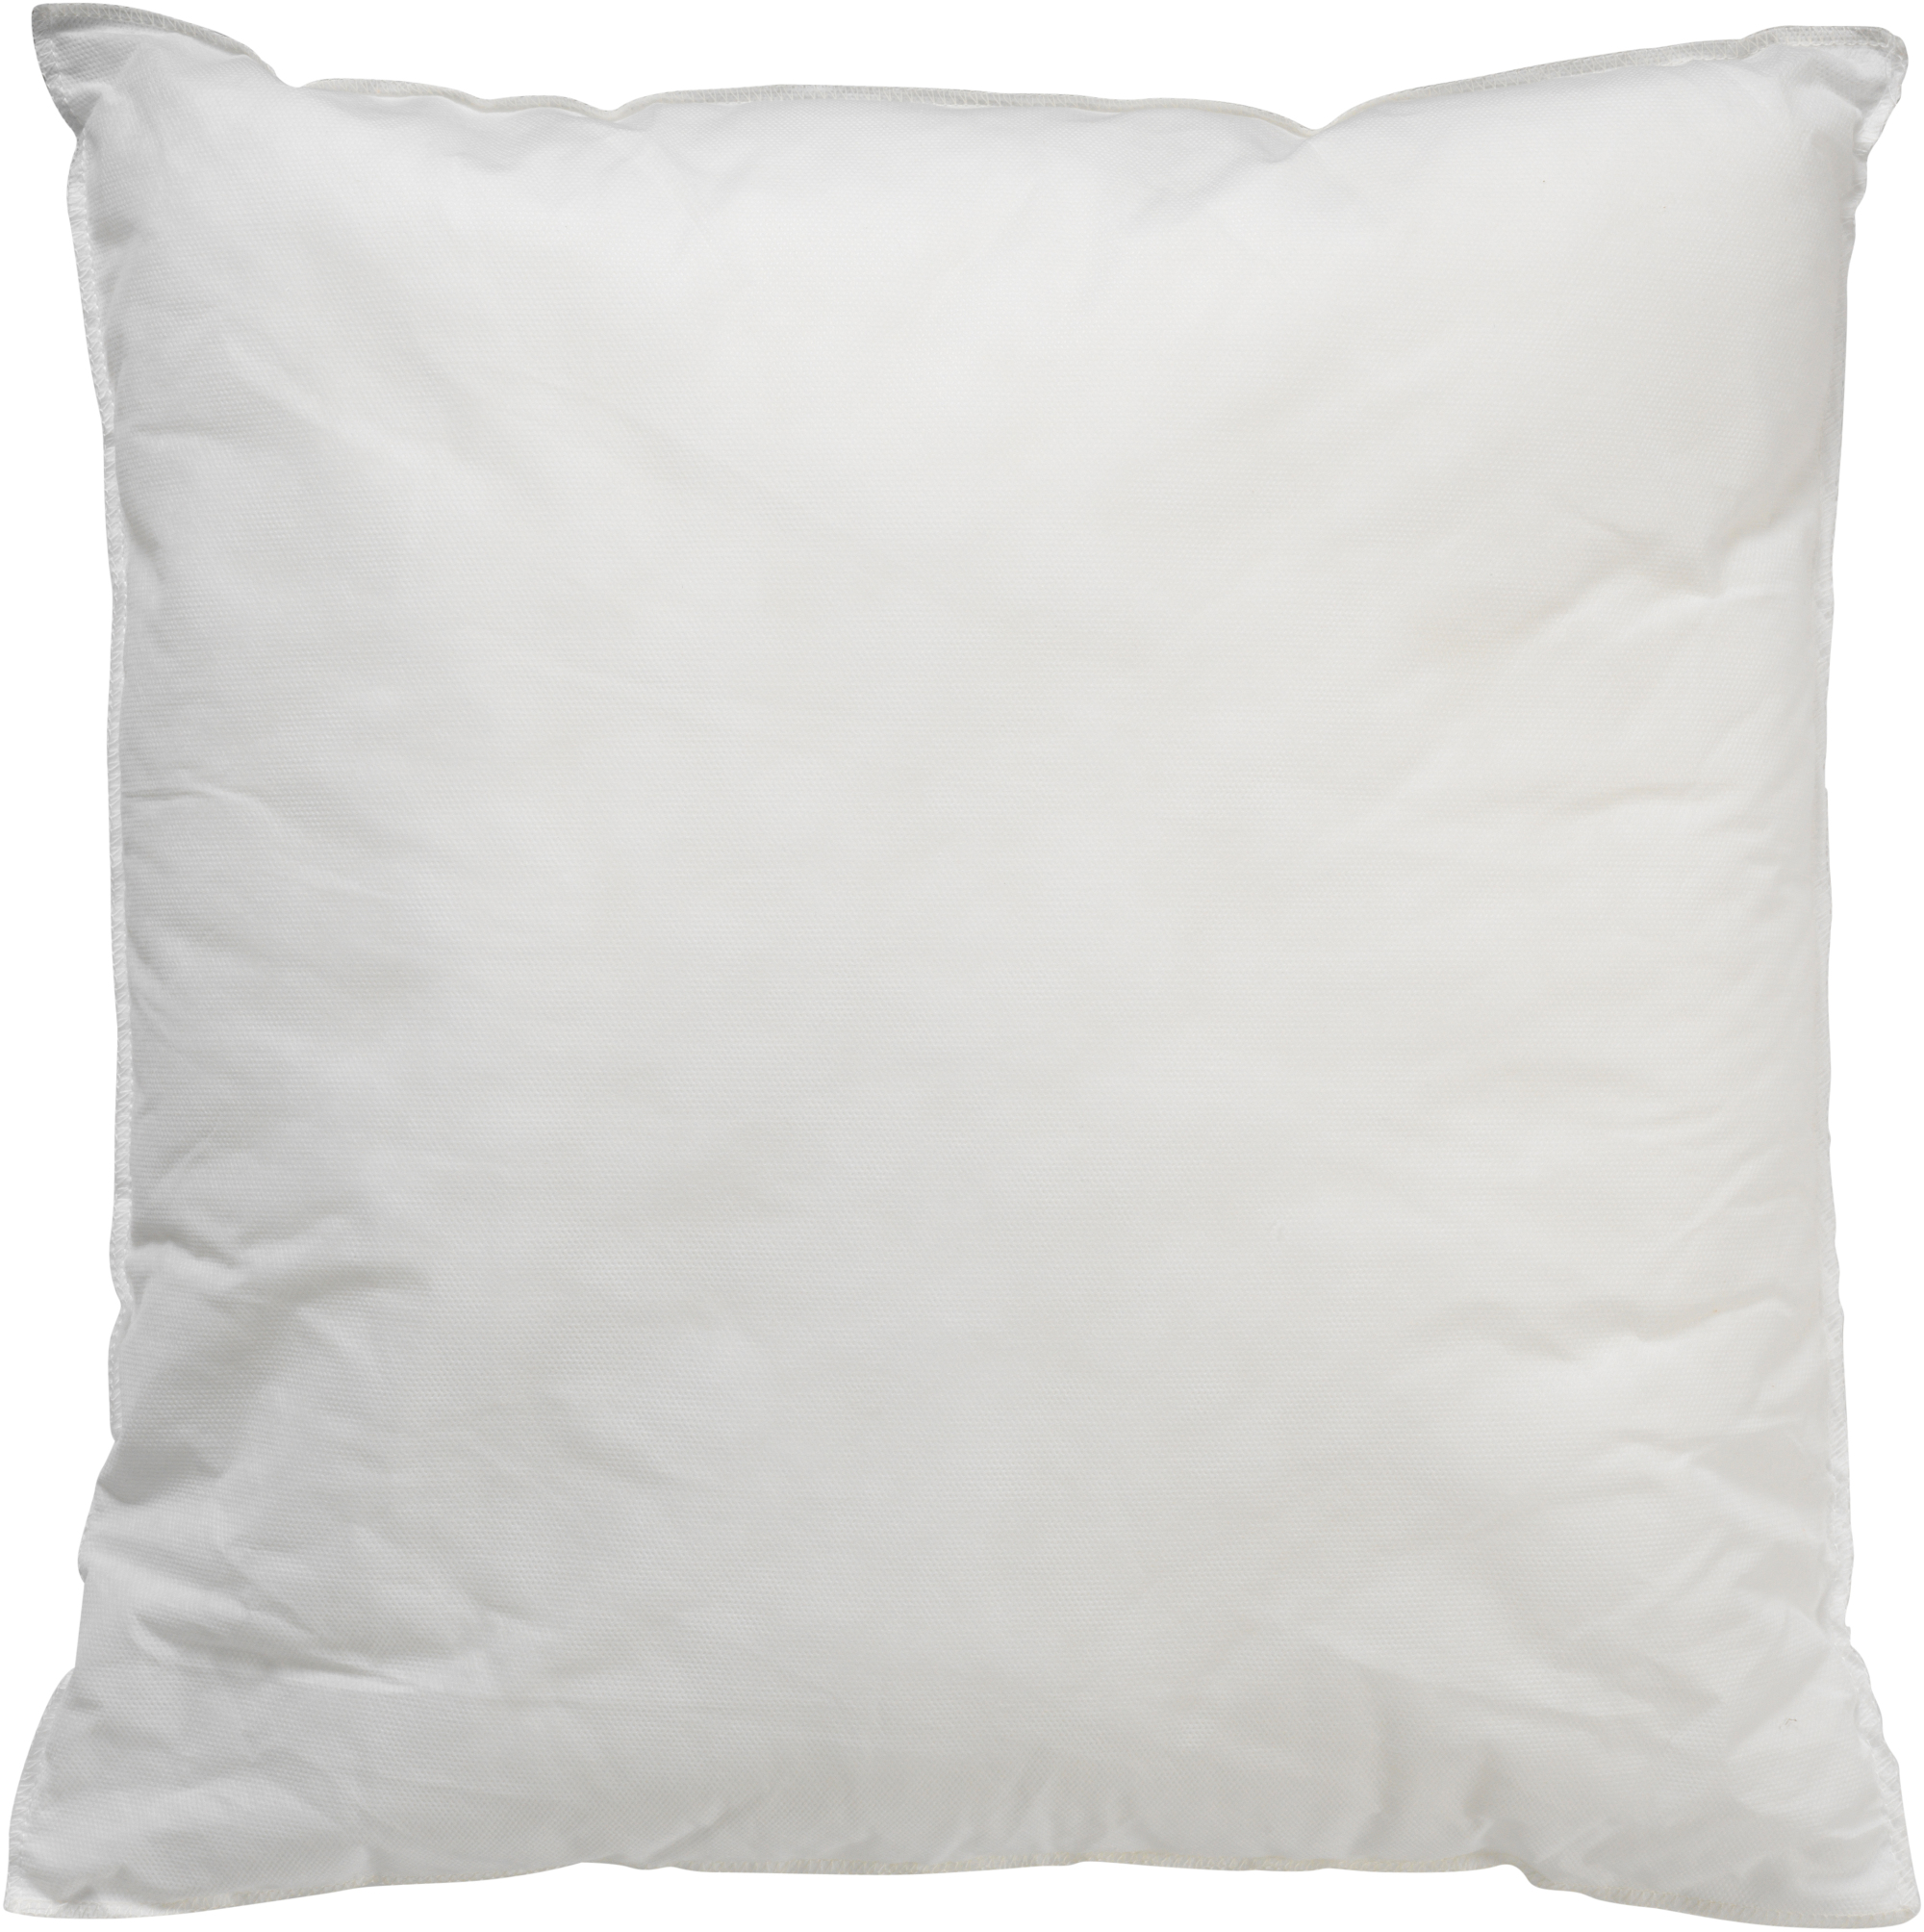 Inner cushion 60x60 cm With polyester filling - 670 gram